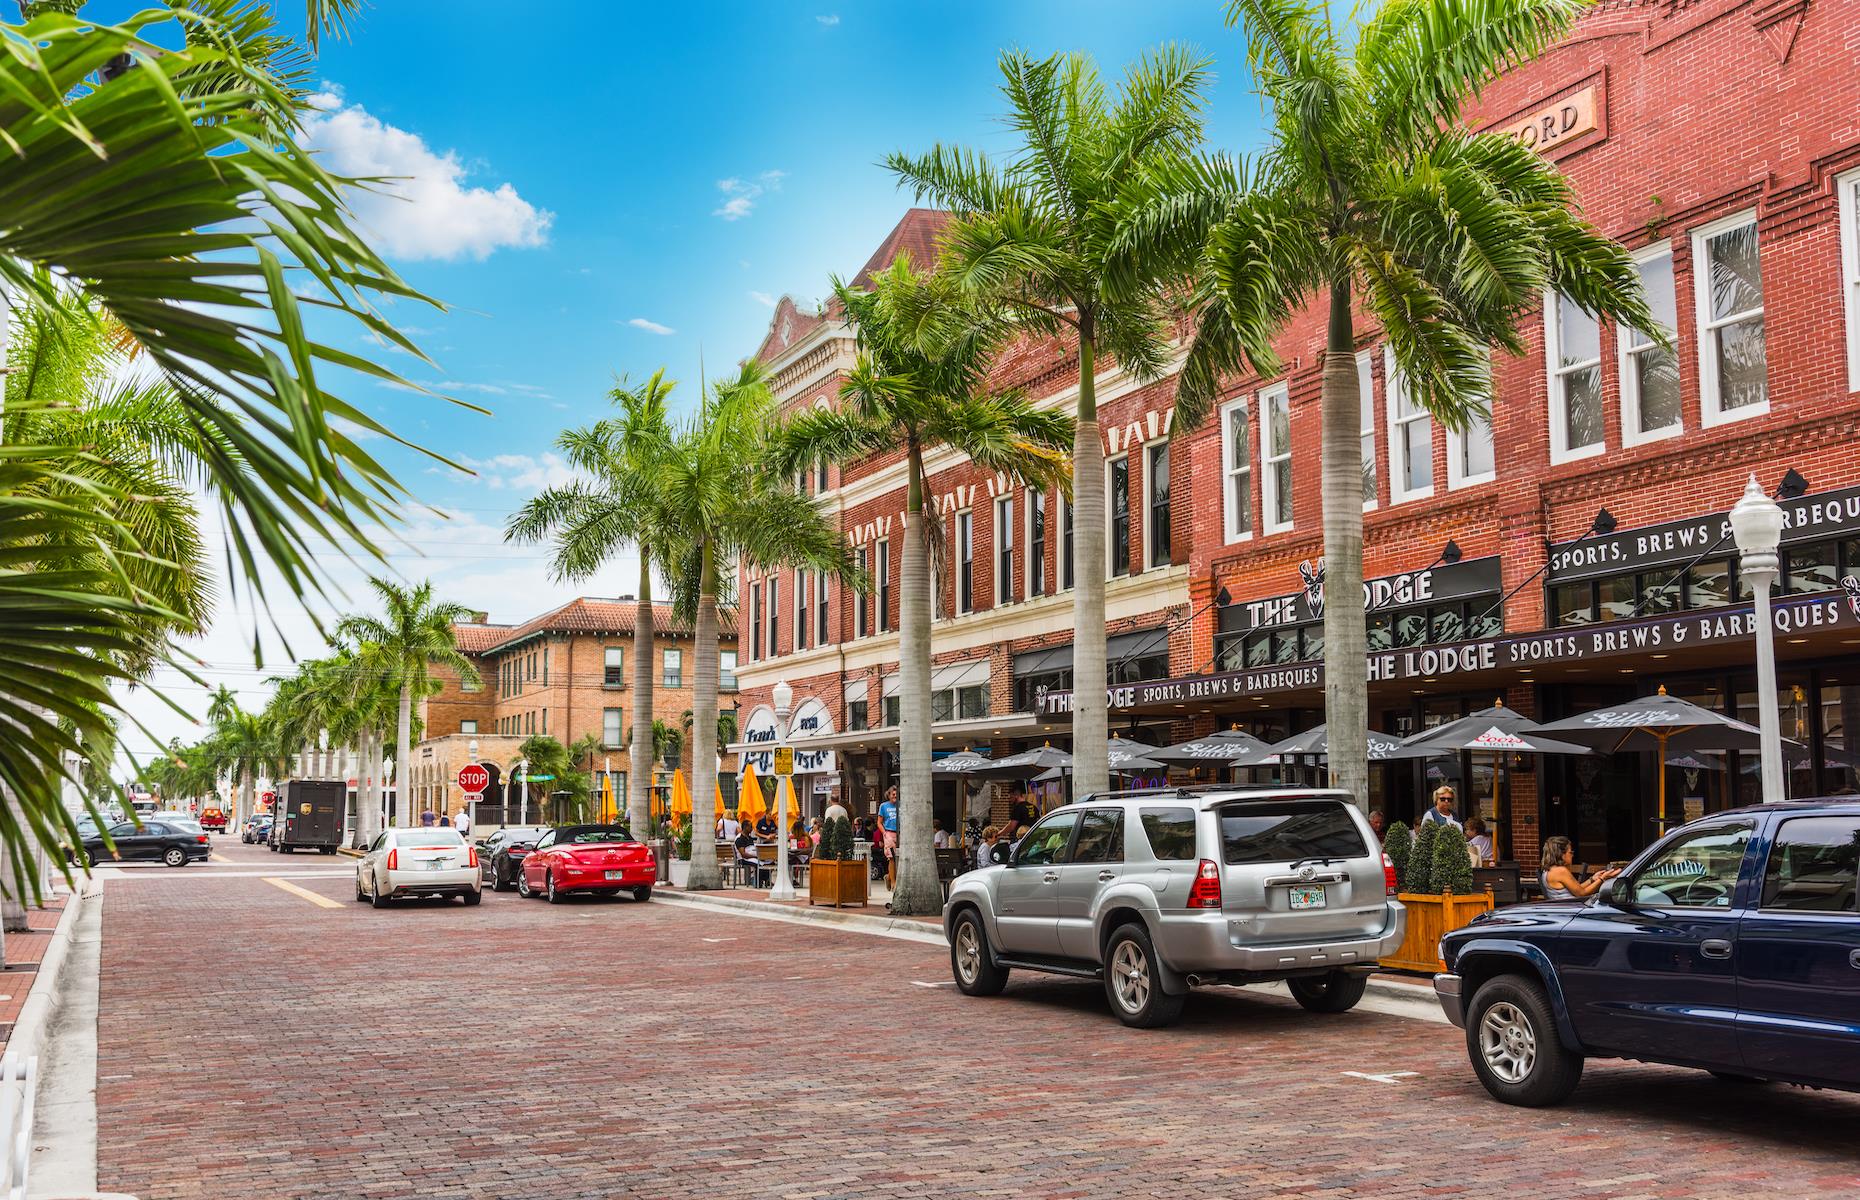 On the first Friday of every month, the charming red-brick streets in downtown Fort Myers River District are transformed into a dazzling open-air art gallery for the Fort Myers Art Walk. From 6pm to 10pm, visitors follow a trail around stalls and galleries, and browse contemporary artworks from bold-painted canvases to small sculptures, by local and regional artists. You can also grab a bite to eat and catch some live music.